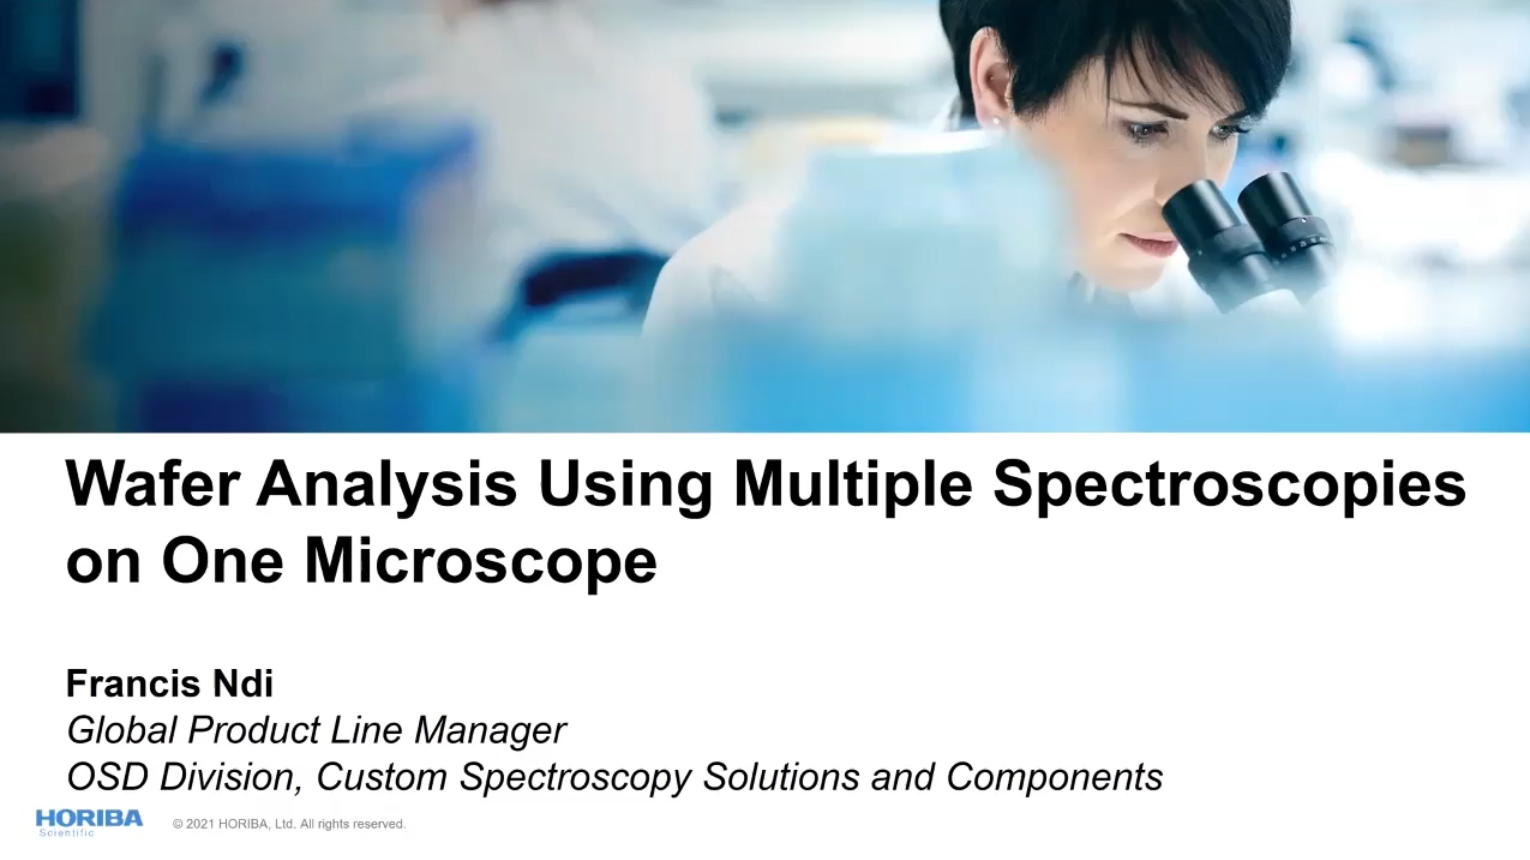 Wafer Analysis Using Multiple Spectroscopies on One Microscope